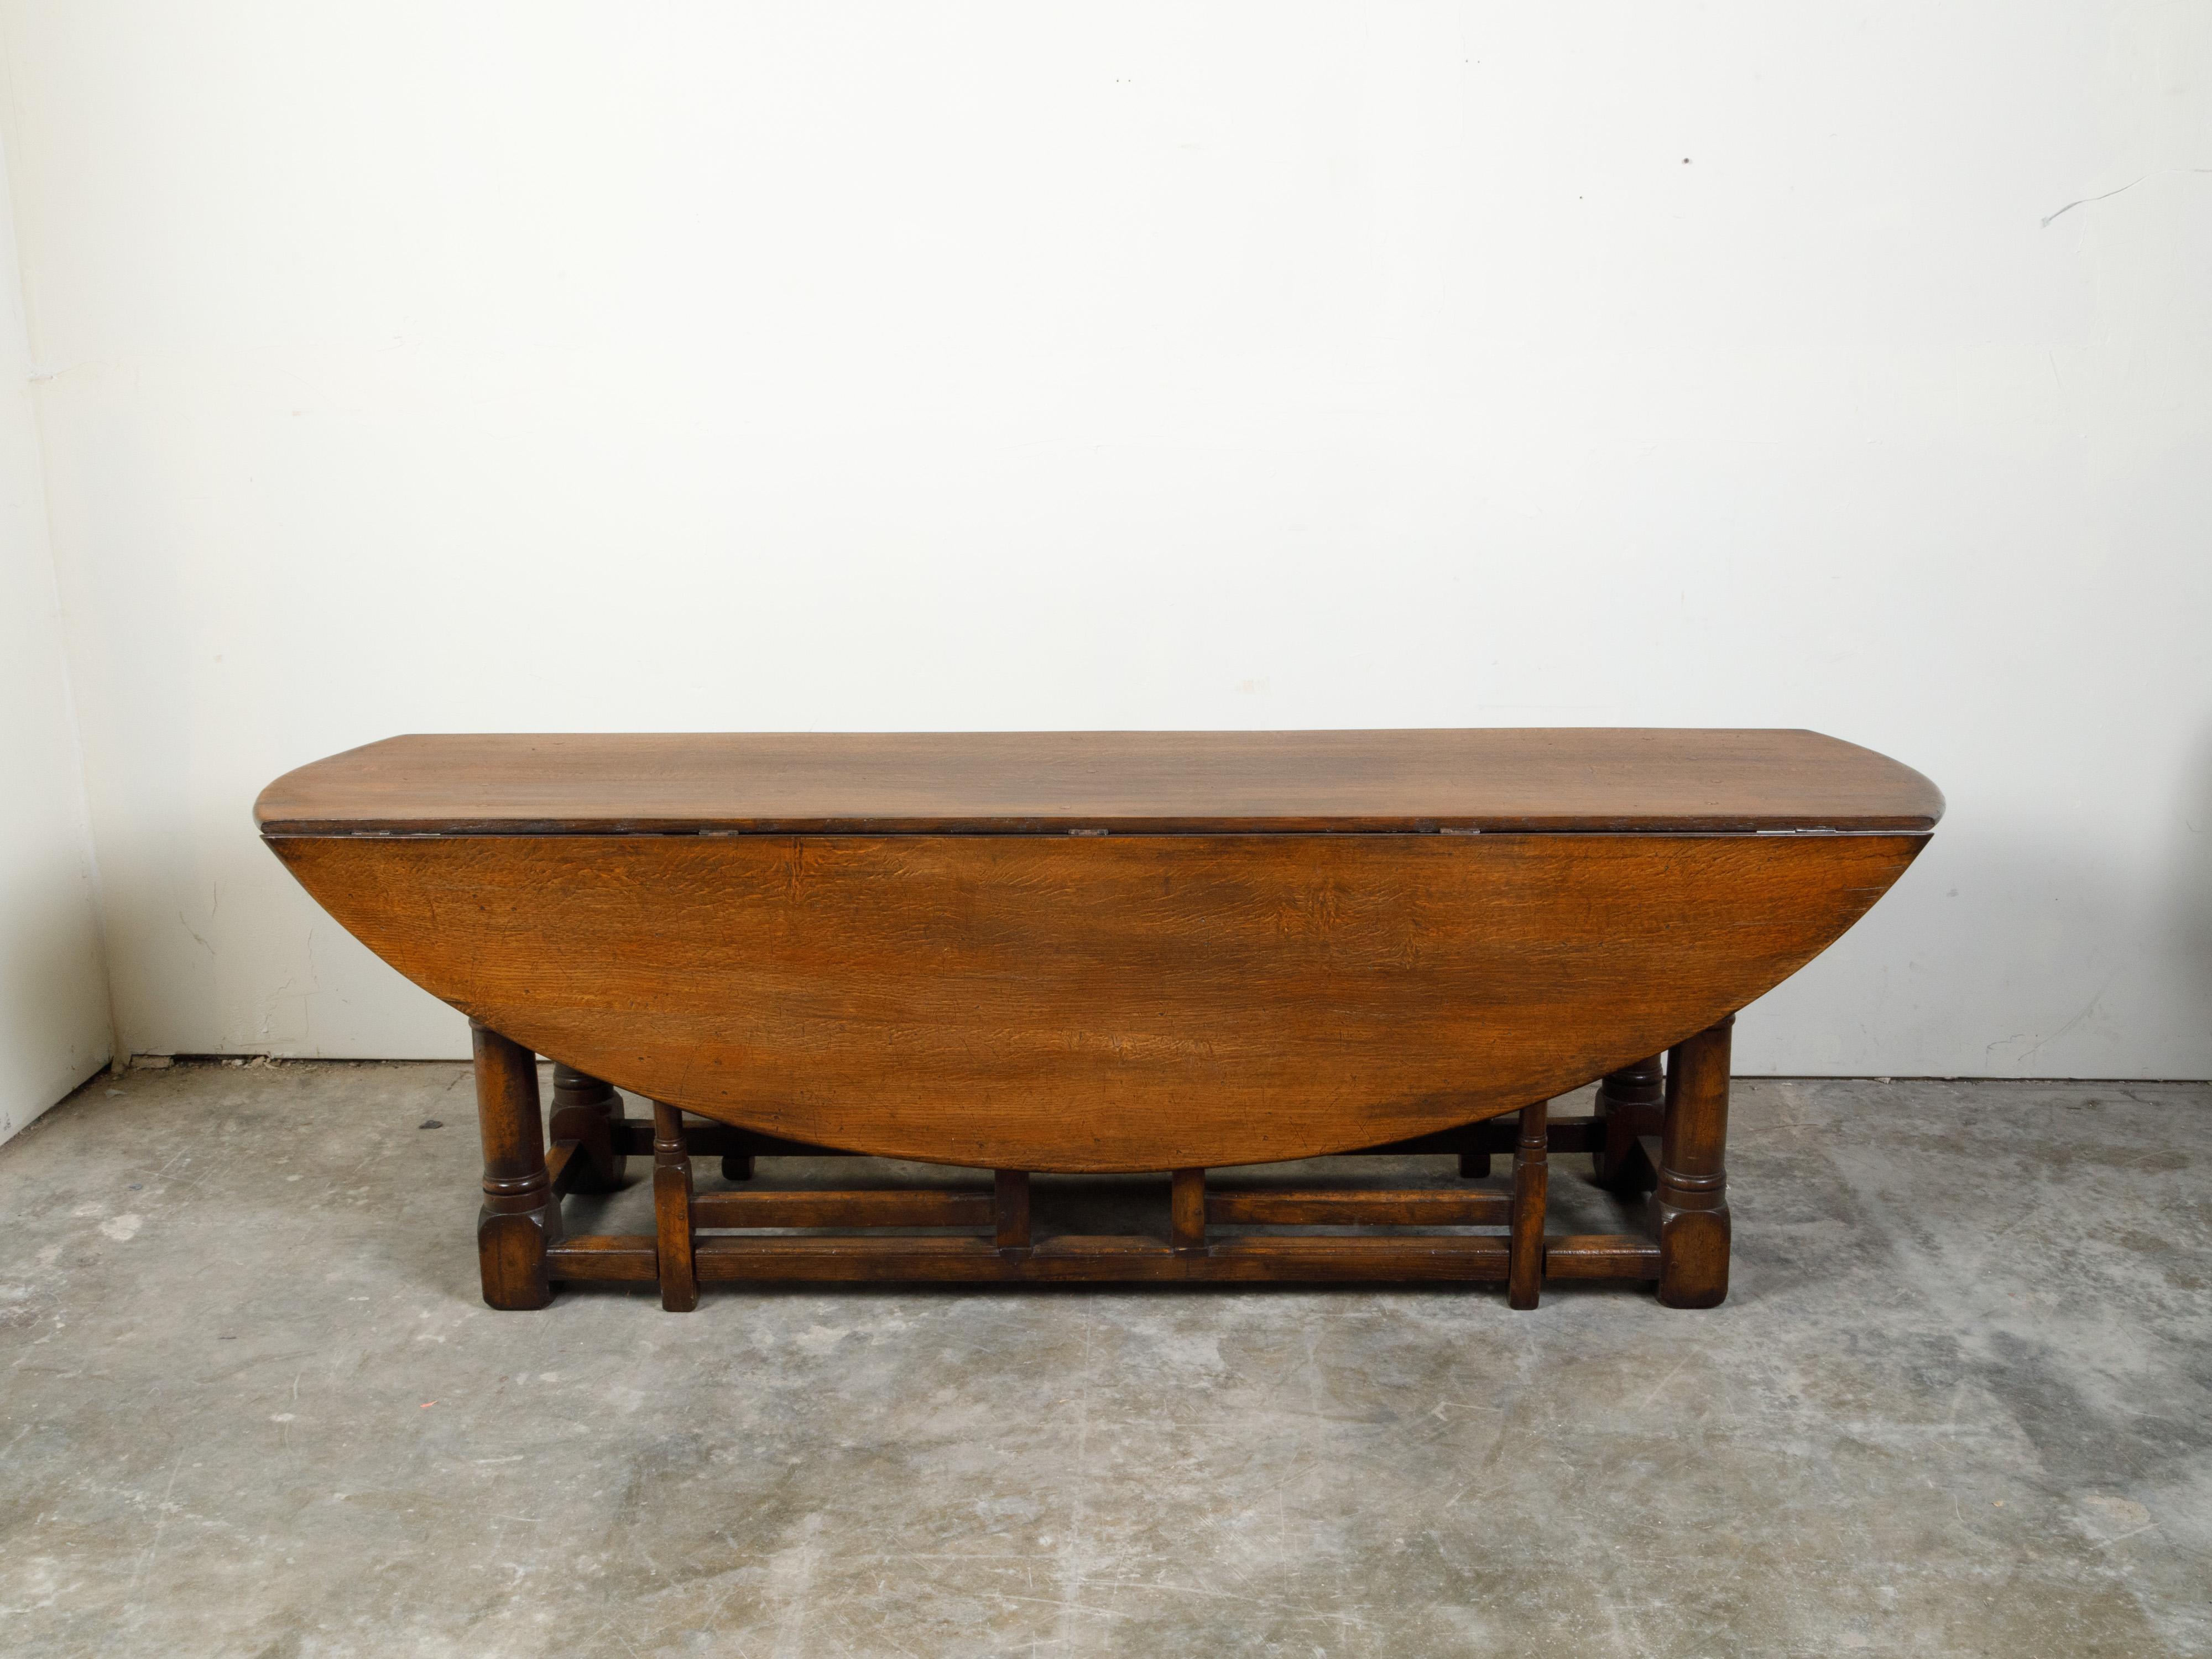 An English oak oval top drop-leaf table from the 19th century with gateleg base. Created in England during the 19th century, this oak table features an oval top made of two drop leaves. The depth of the table when the leaves are down is 24